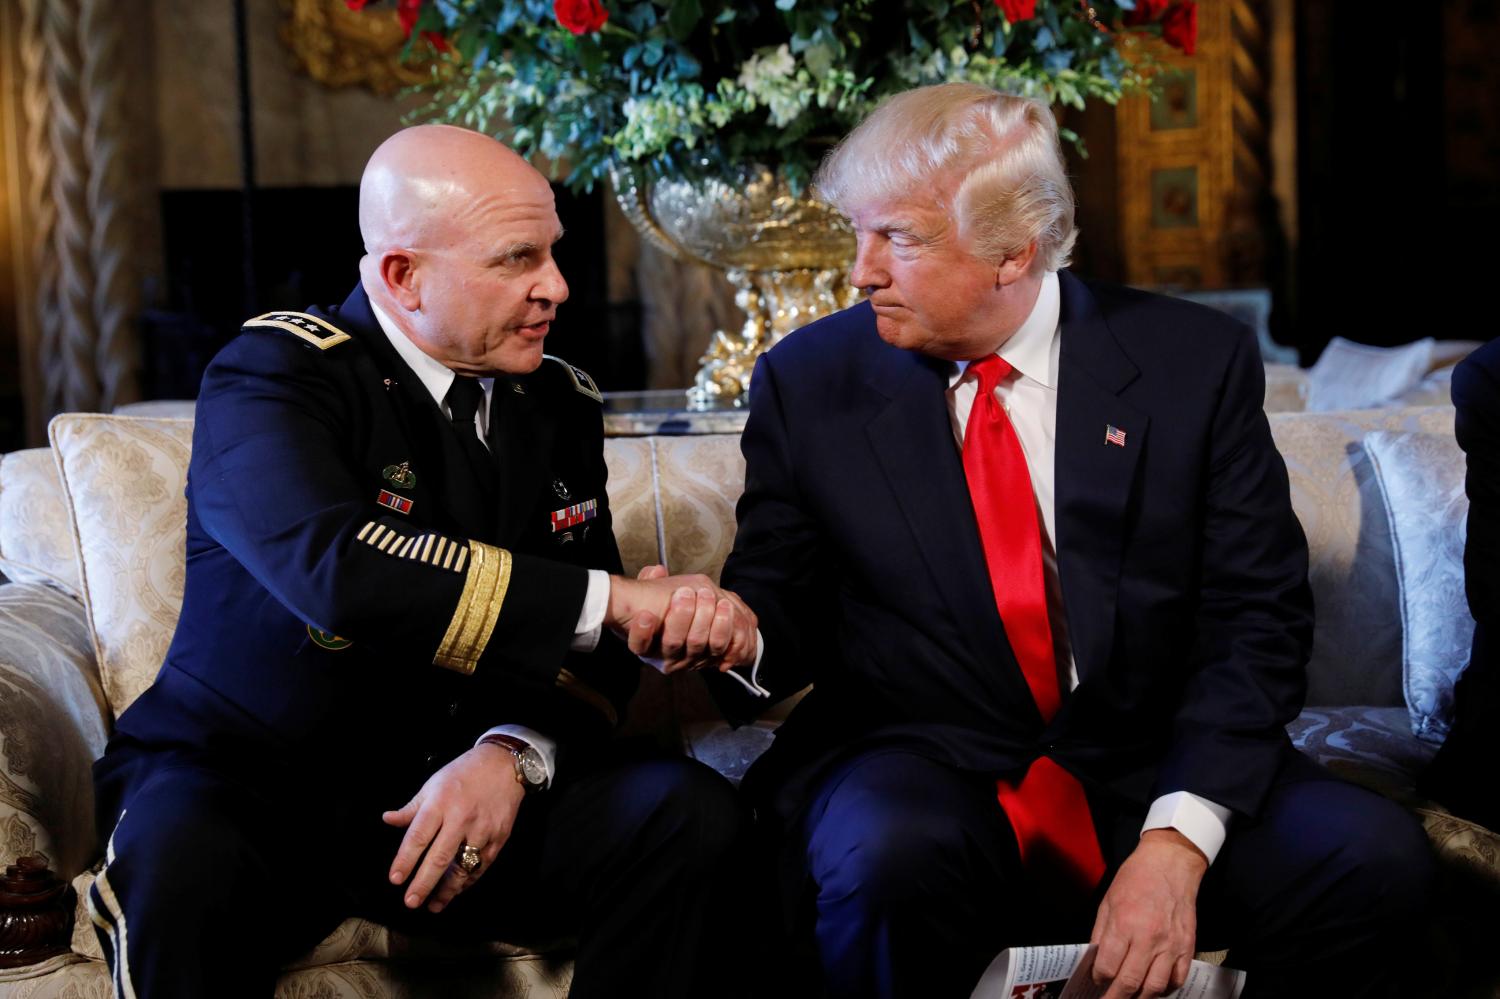 H.R. McMaster and Donald Trump shake hands